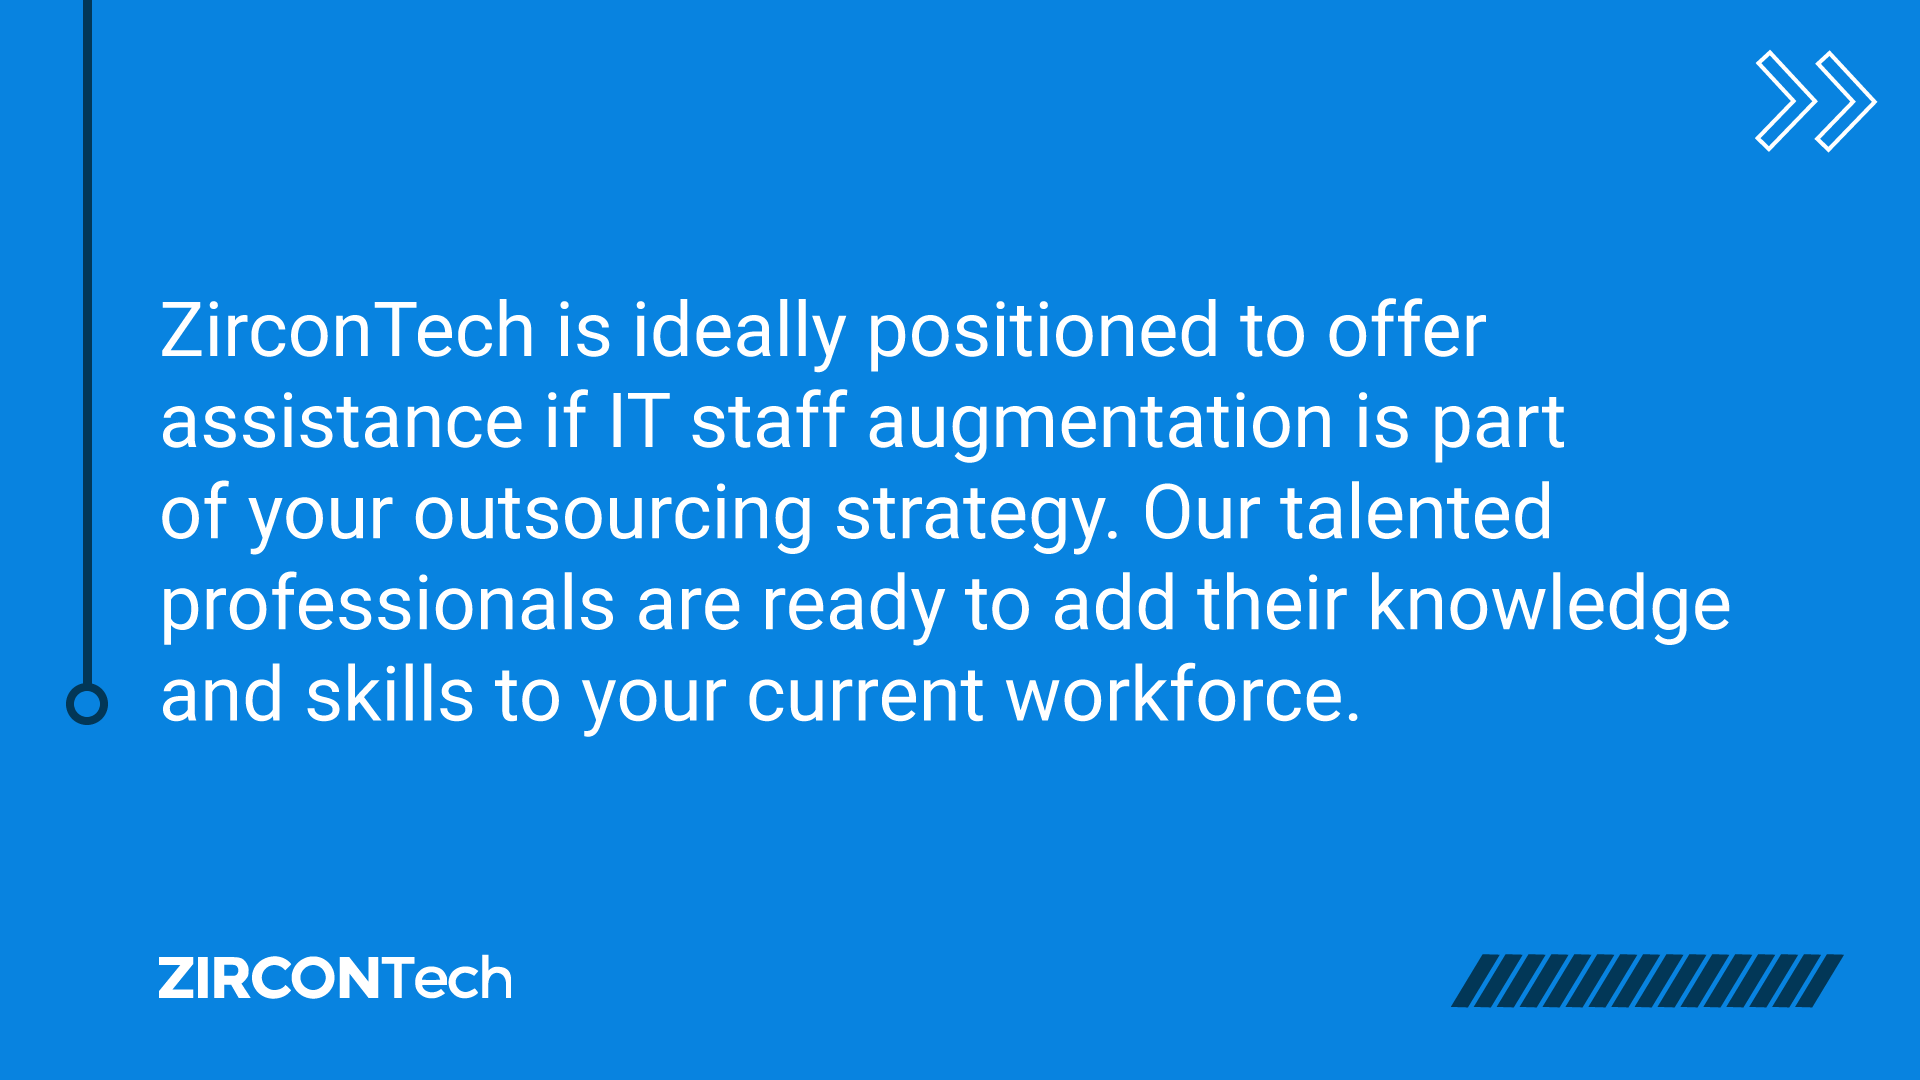 Zircontech is ideally positioned to offer assistance if it staff augmentation is part of your outsourcing strategy